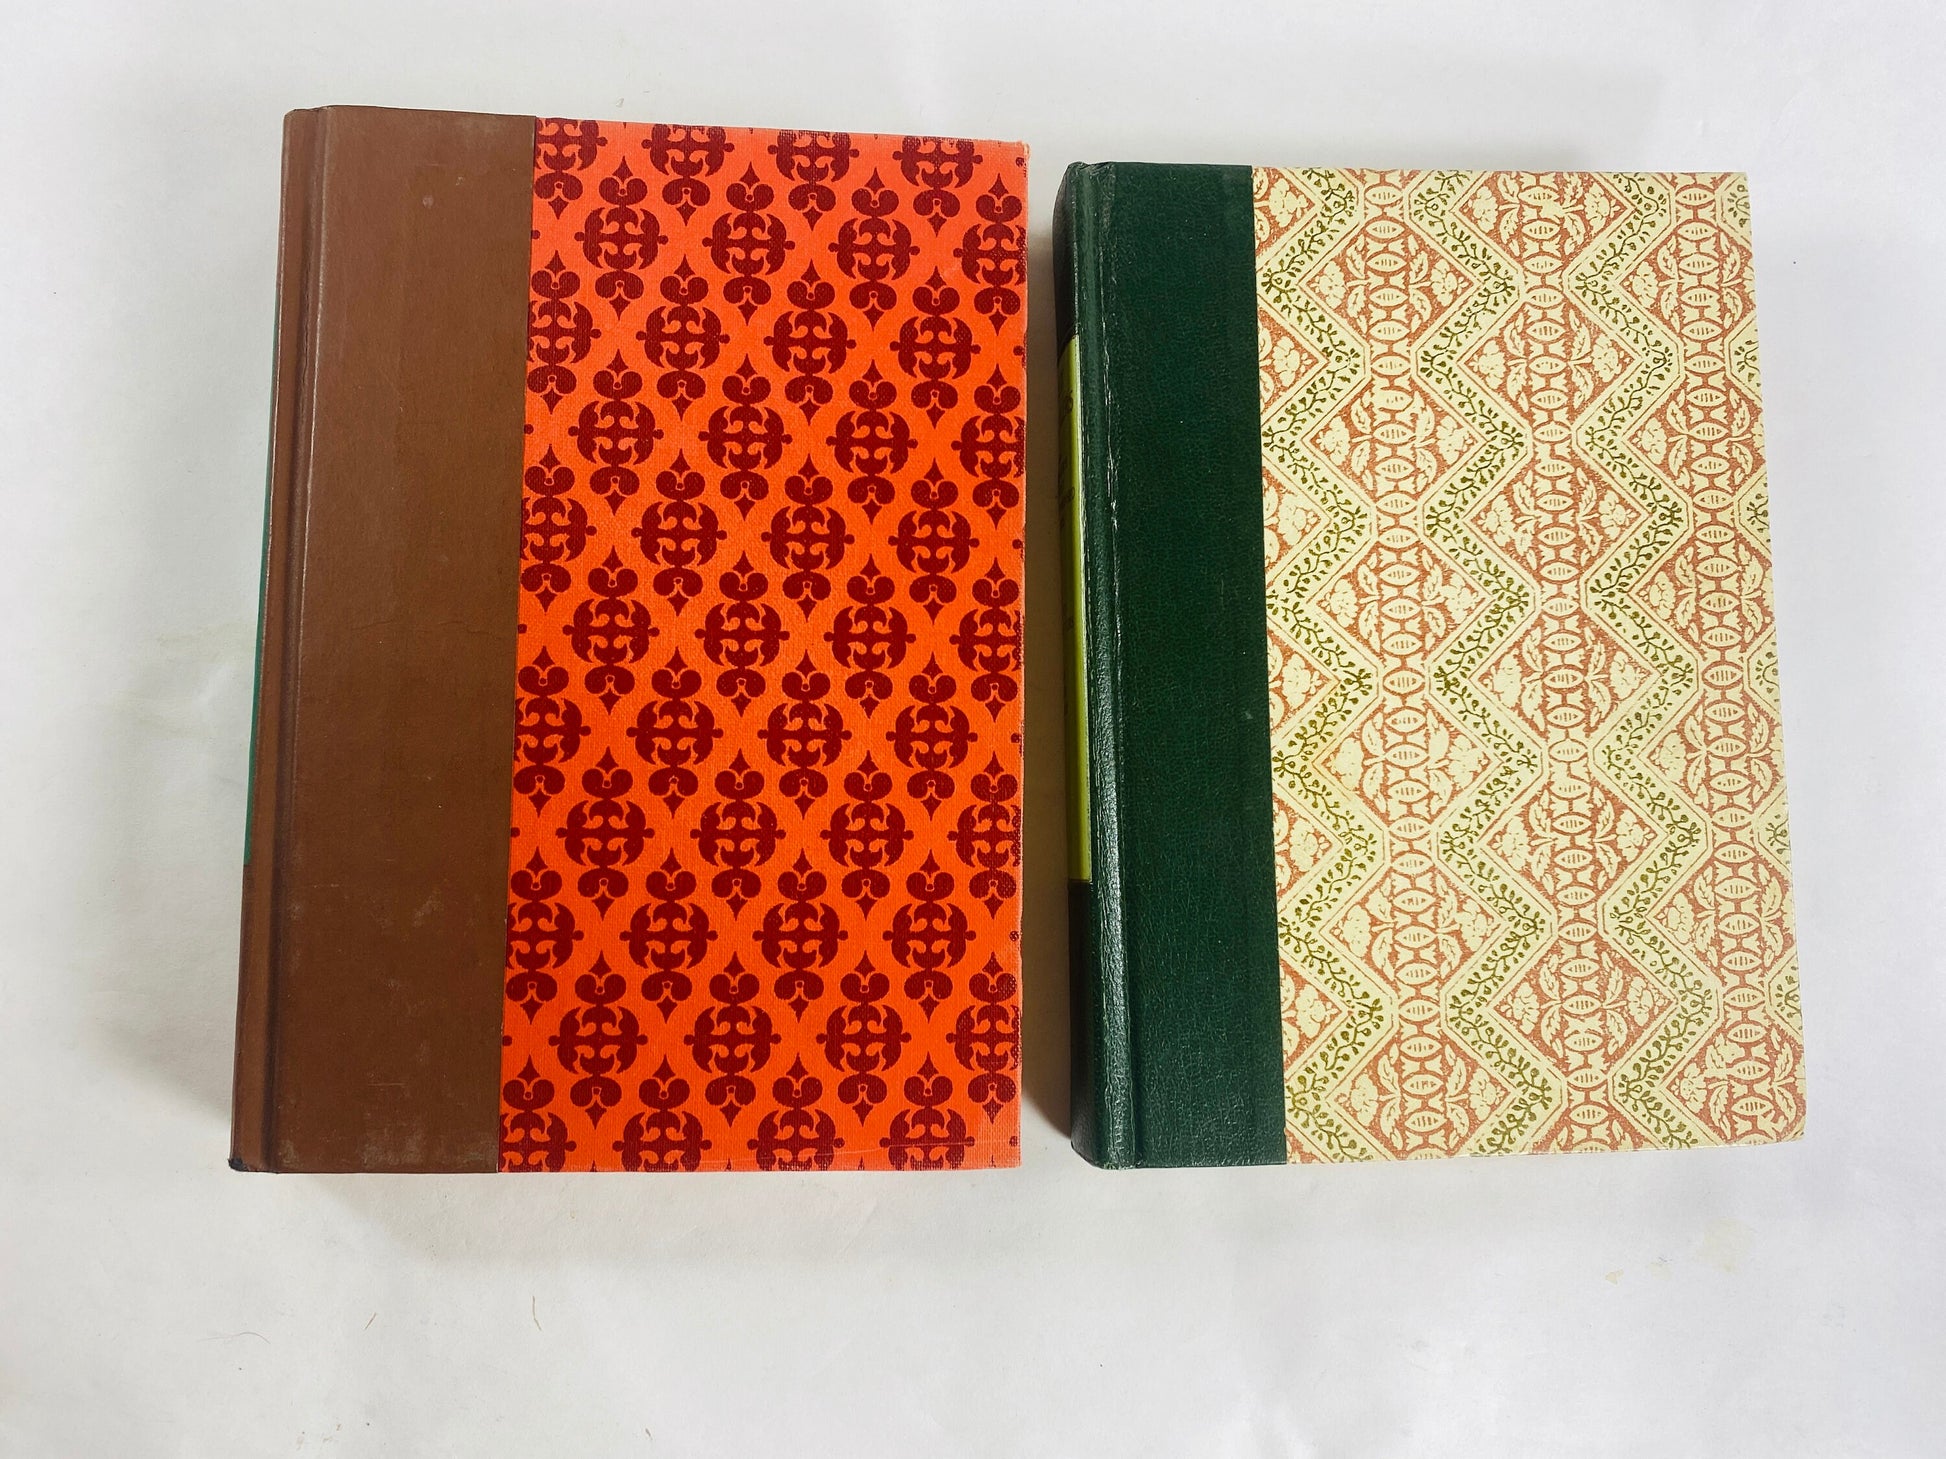 Beautiful Reader's Digest vintage book set lot Rainbow multi-colored lot circa 1970s featuring patterned covers. Home decor instant library